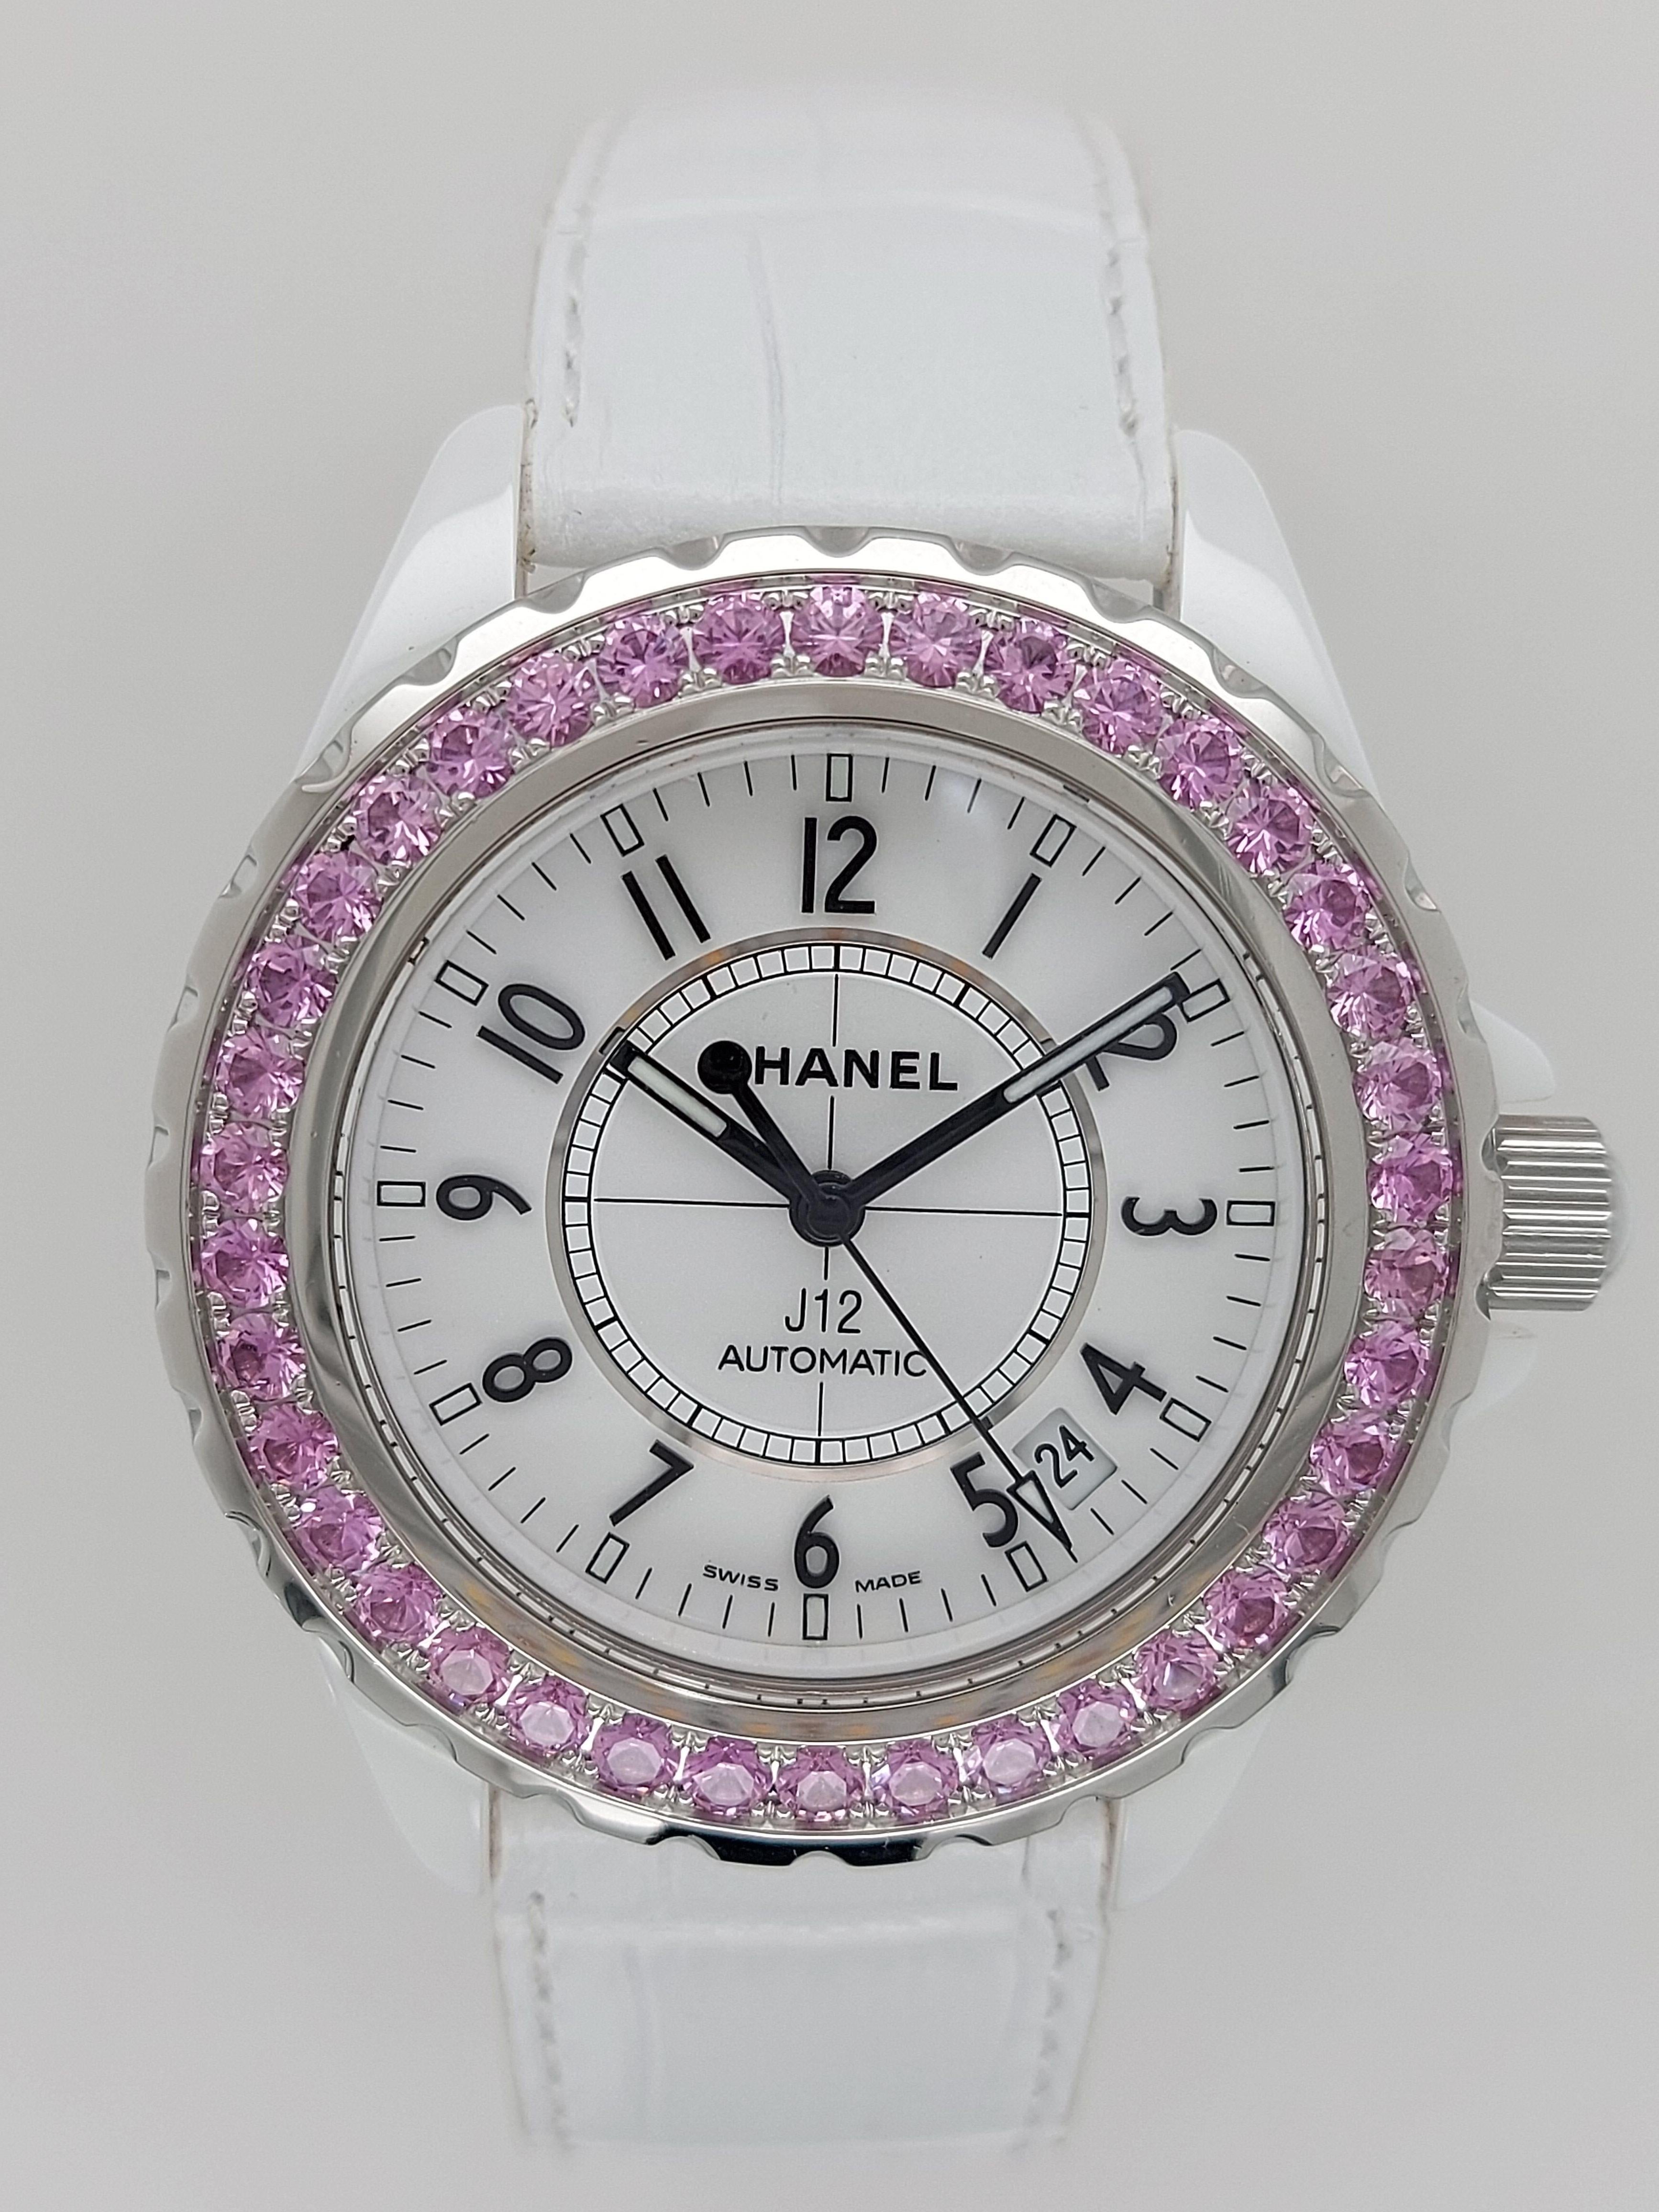 Women's or Men's Chanel J12, Automatic, Ceramic Case, with Pink Sapphires